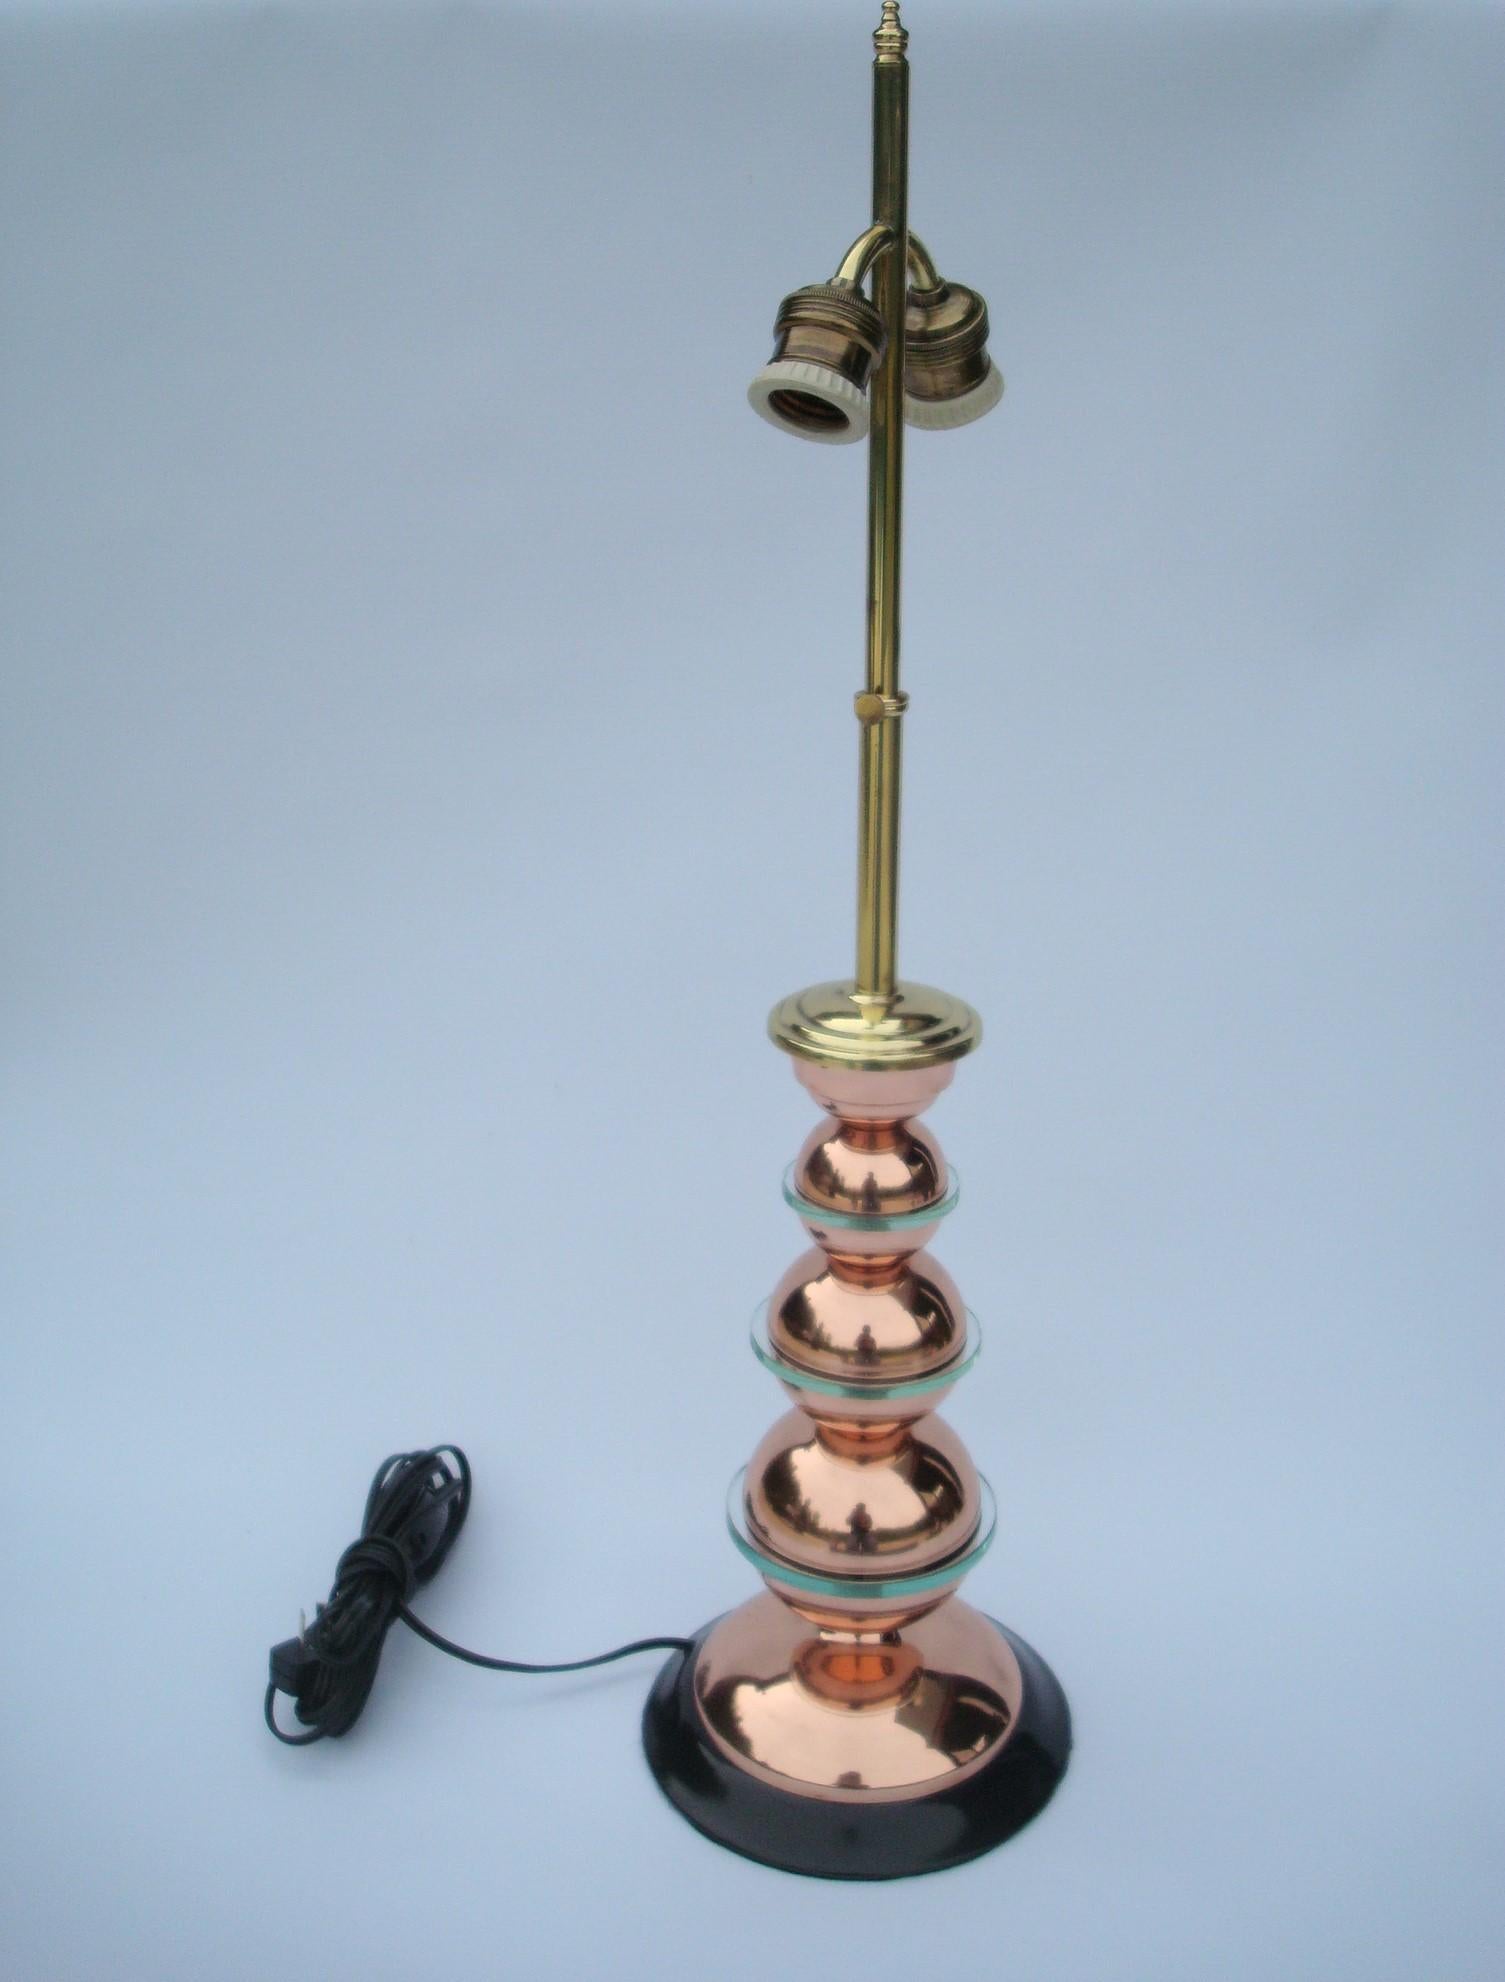 Art Deco copper and glass table lamp 1940´s. In very good restored conditions.
Space style.